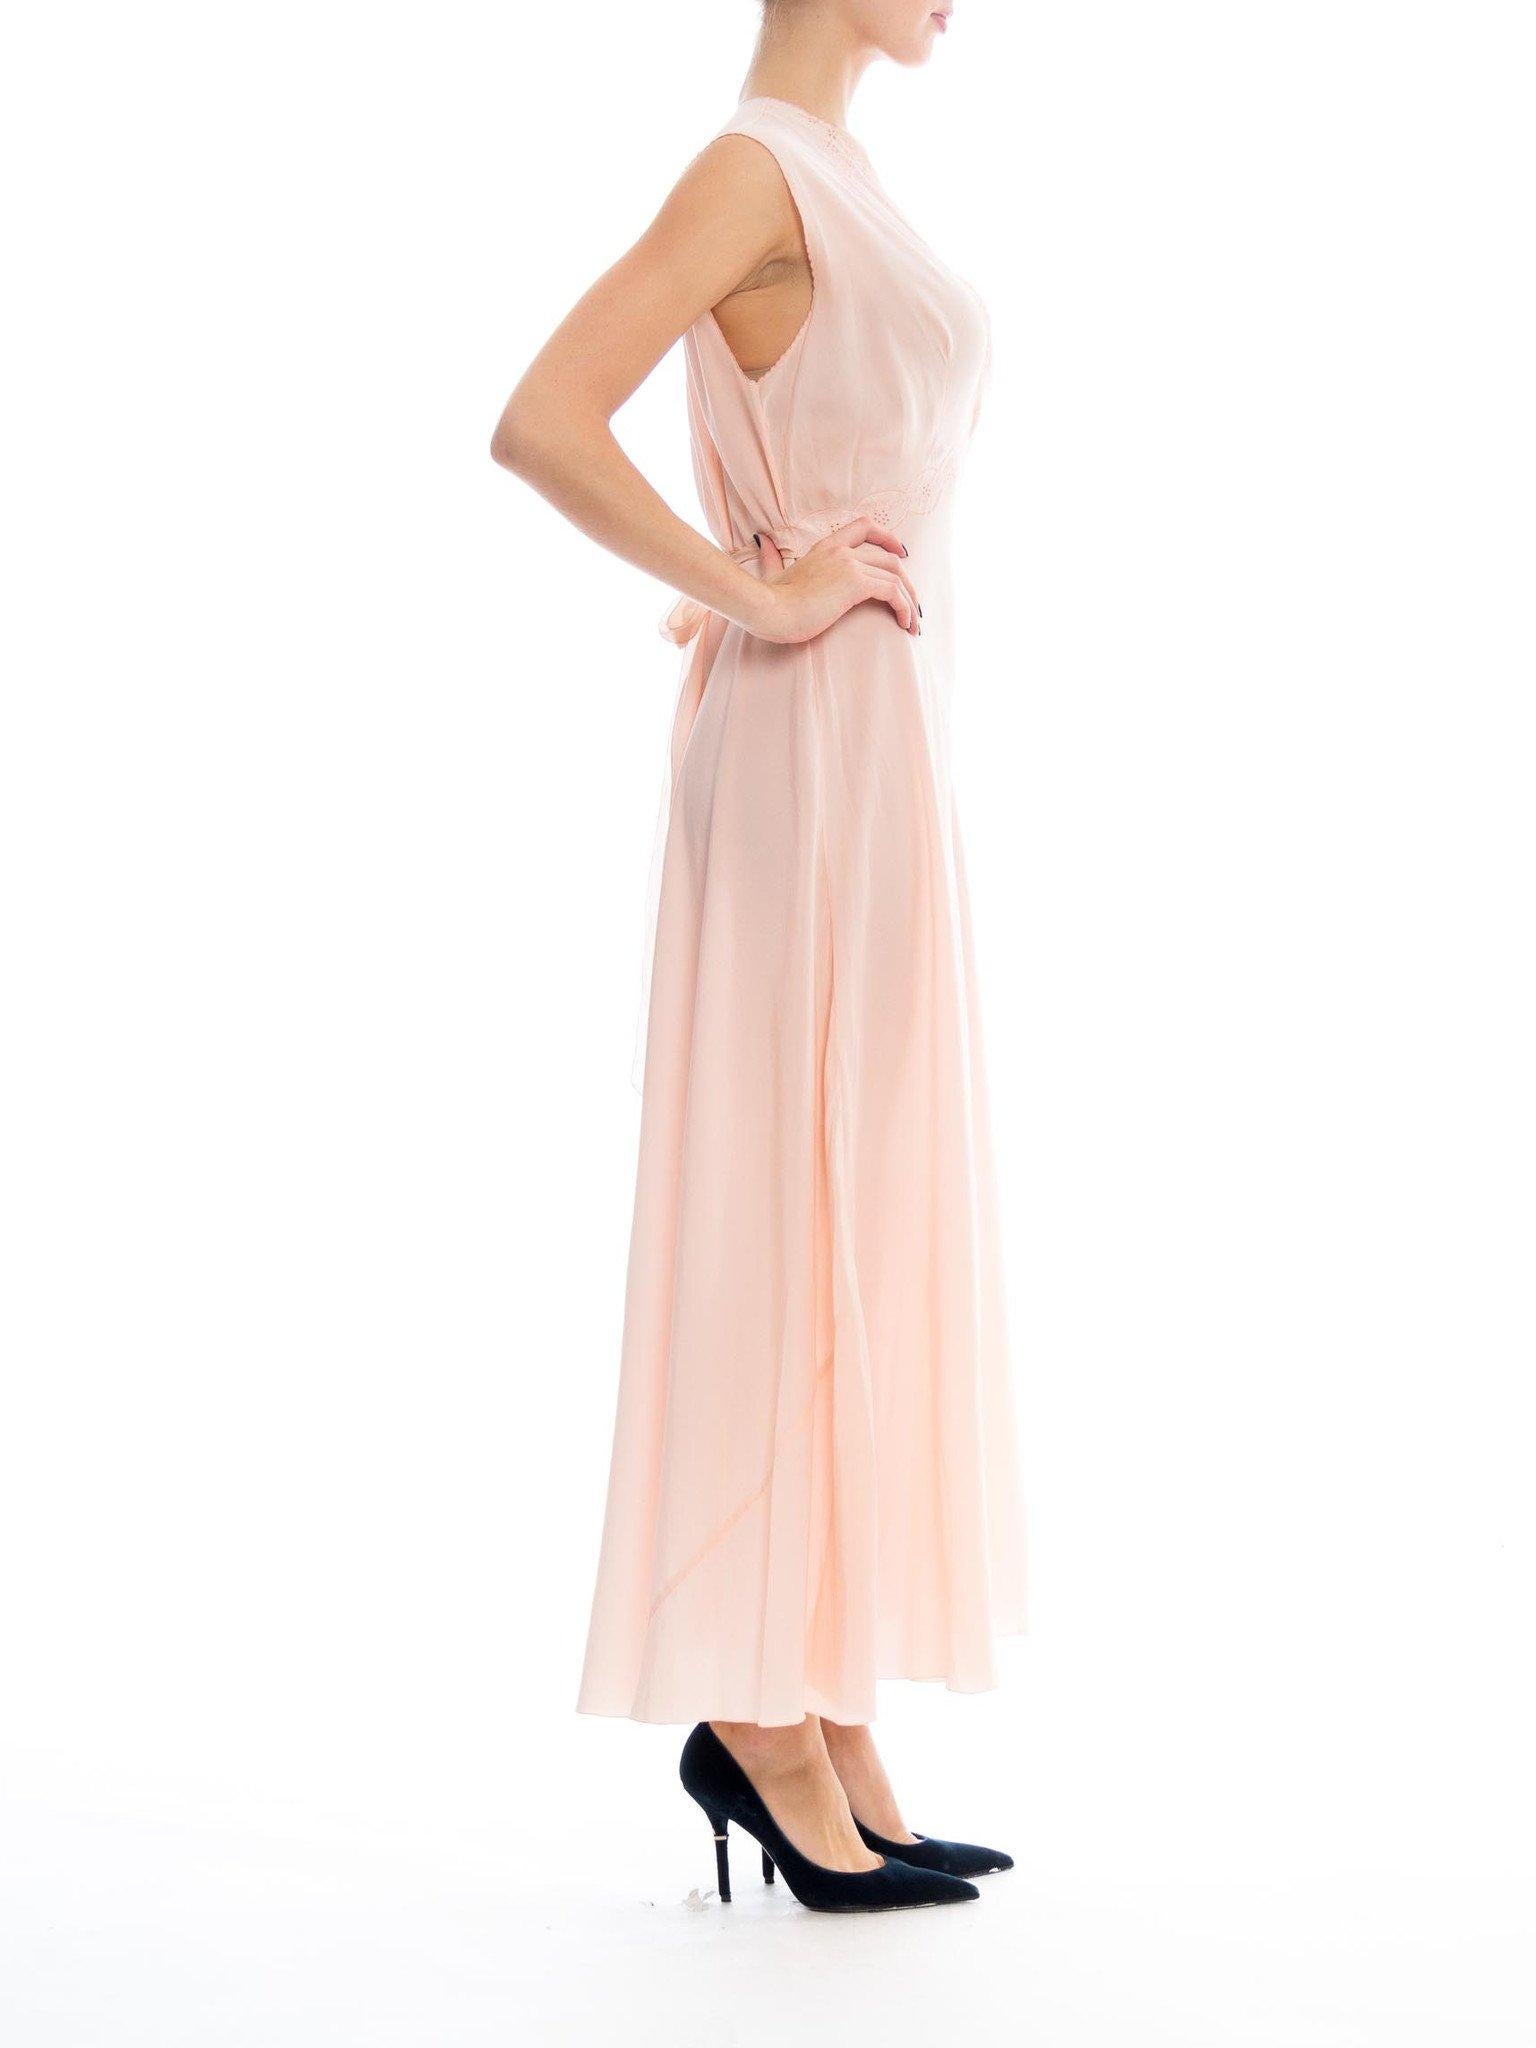 1930S Blush Pink Silk Crepe De Chine French Couture Nightgown  Dress
Negligee With Exceptional Hand Finishing